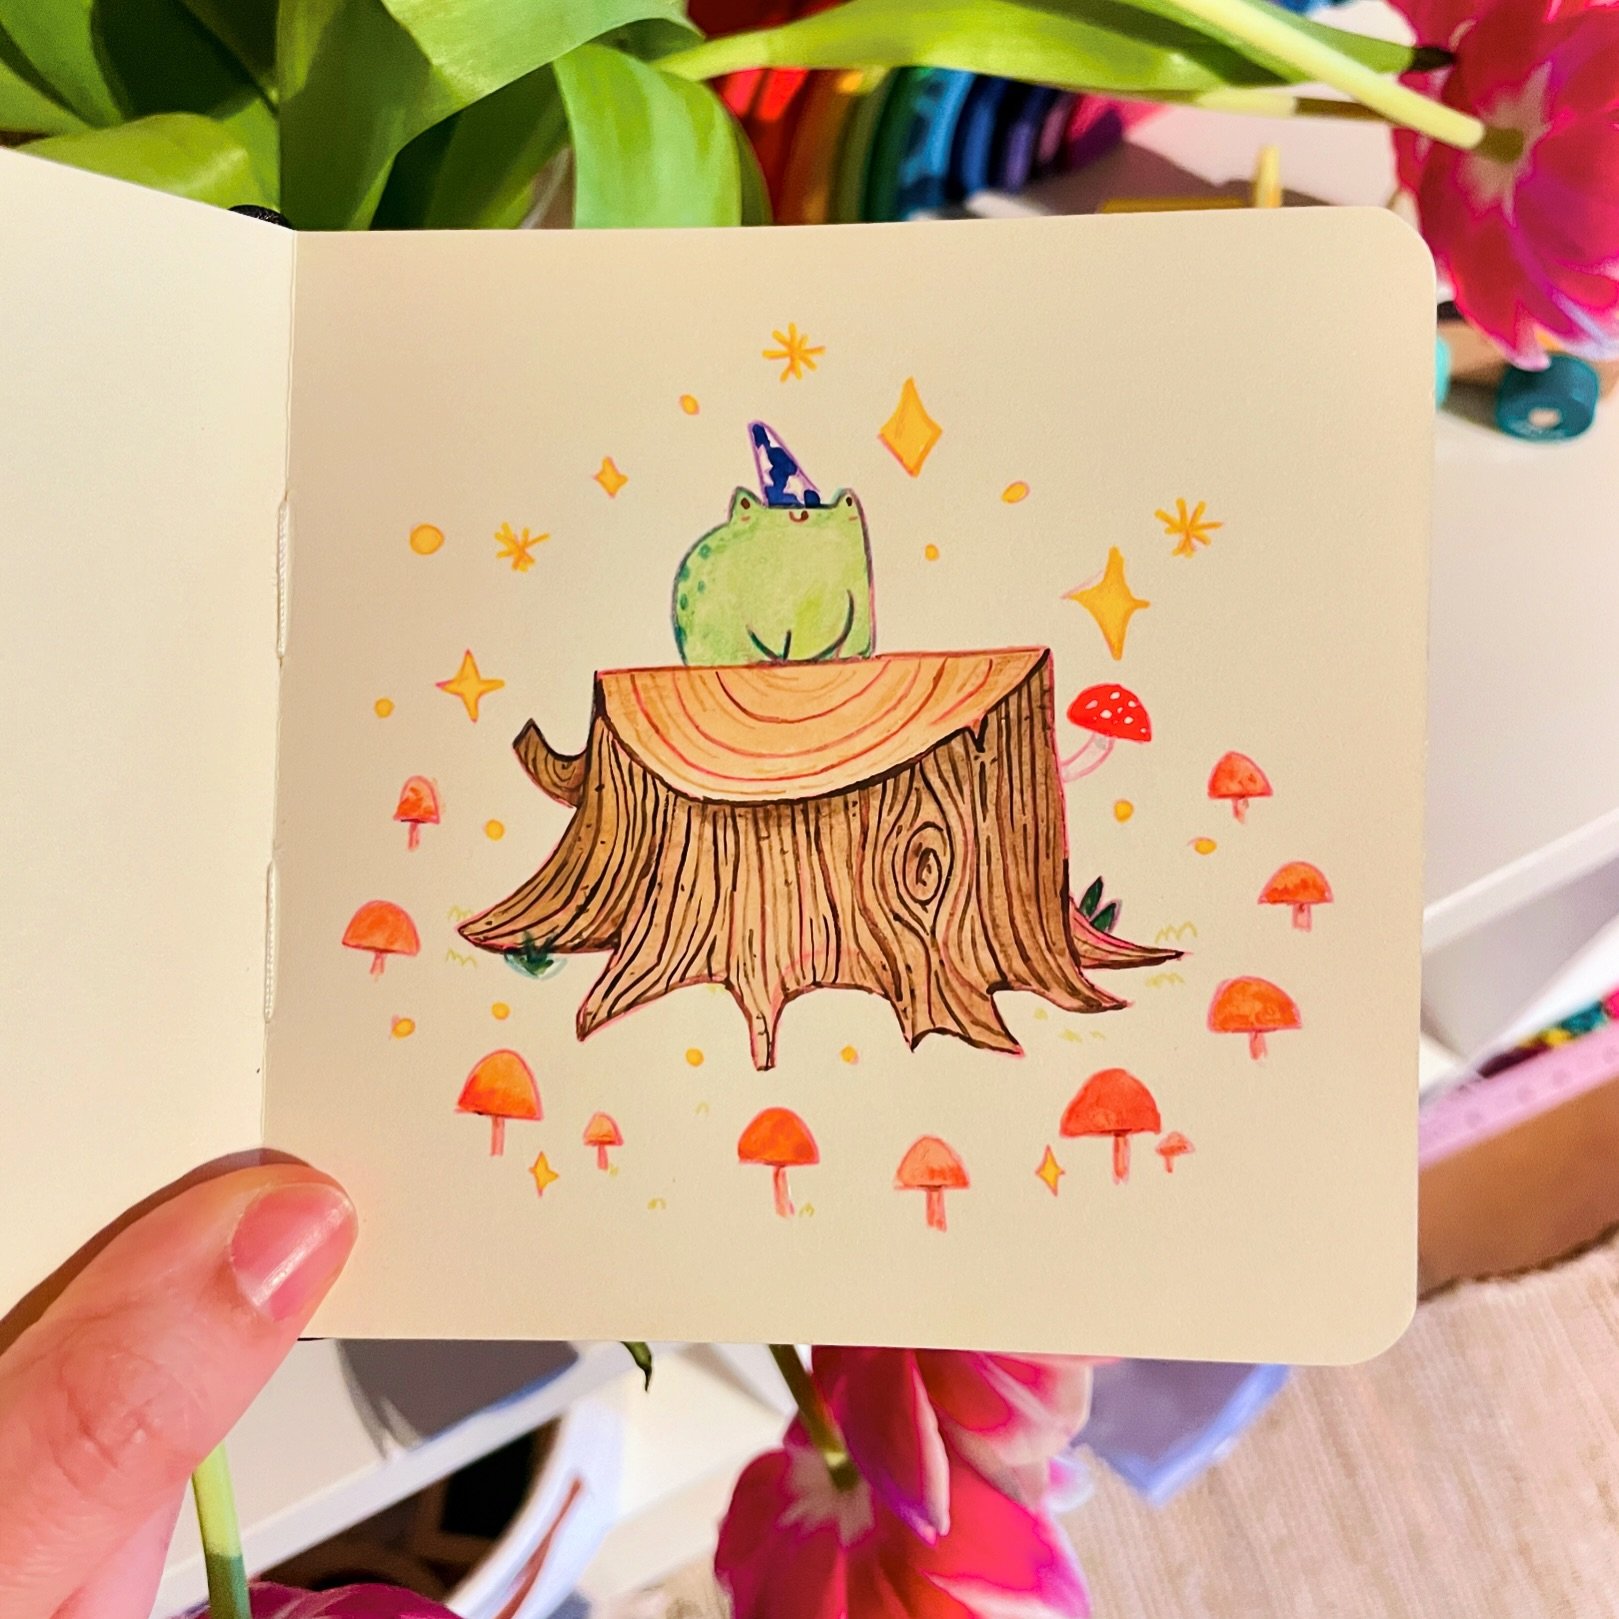 I need to find a magic toad to change this weather 🌦️🥲

#illustration #gouache #mixedmedia #sketchbook #minyillustration #magictoad